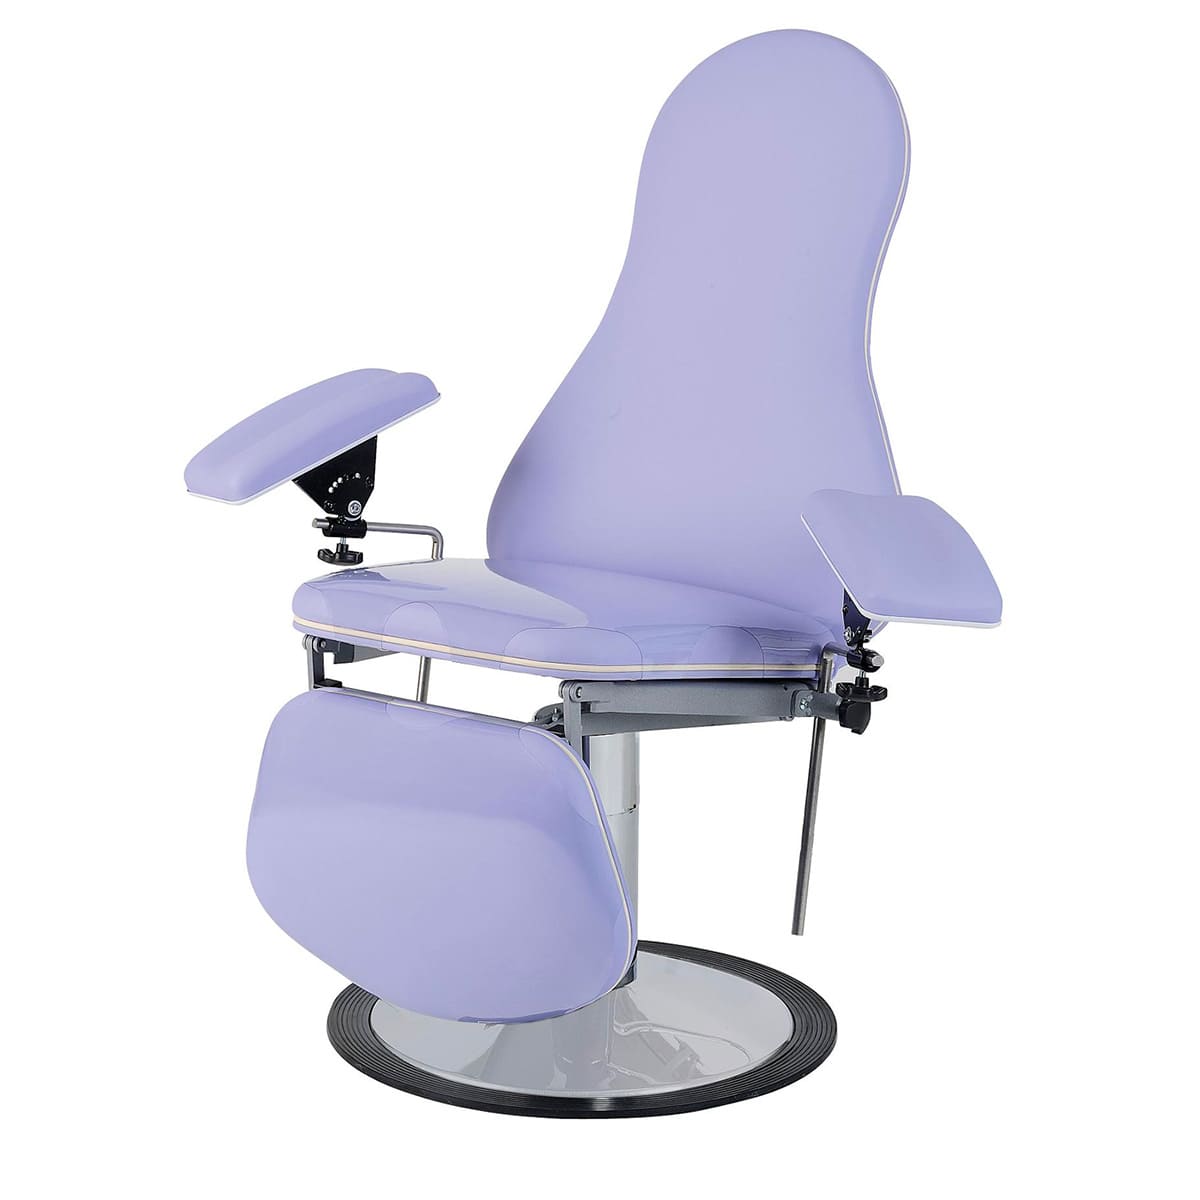 Blood chair height 51cm, 3 sections, non-rotative, with blood test splints